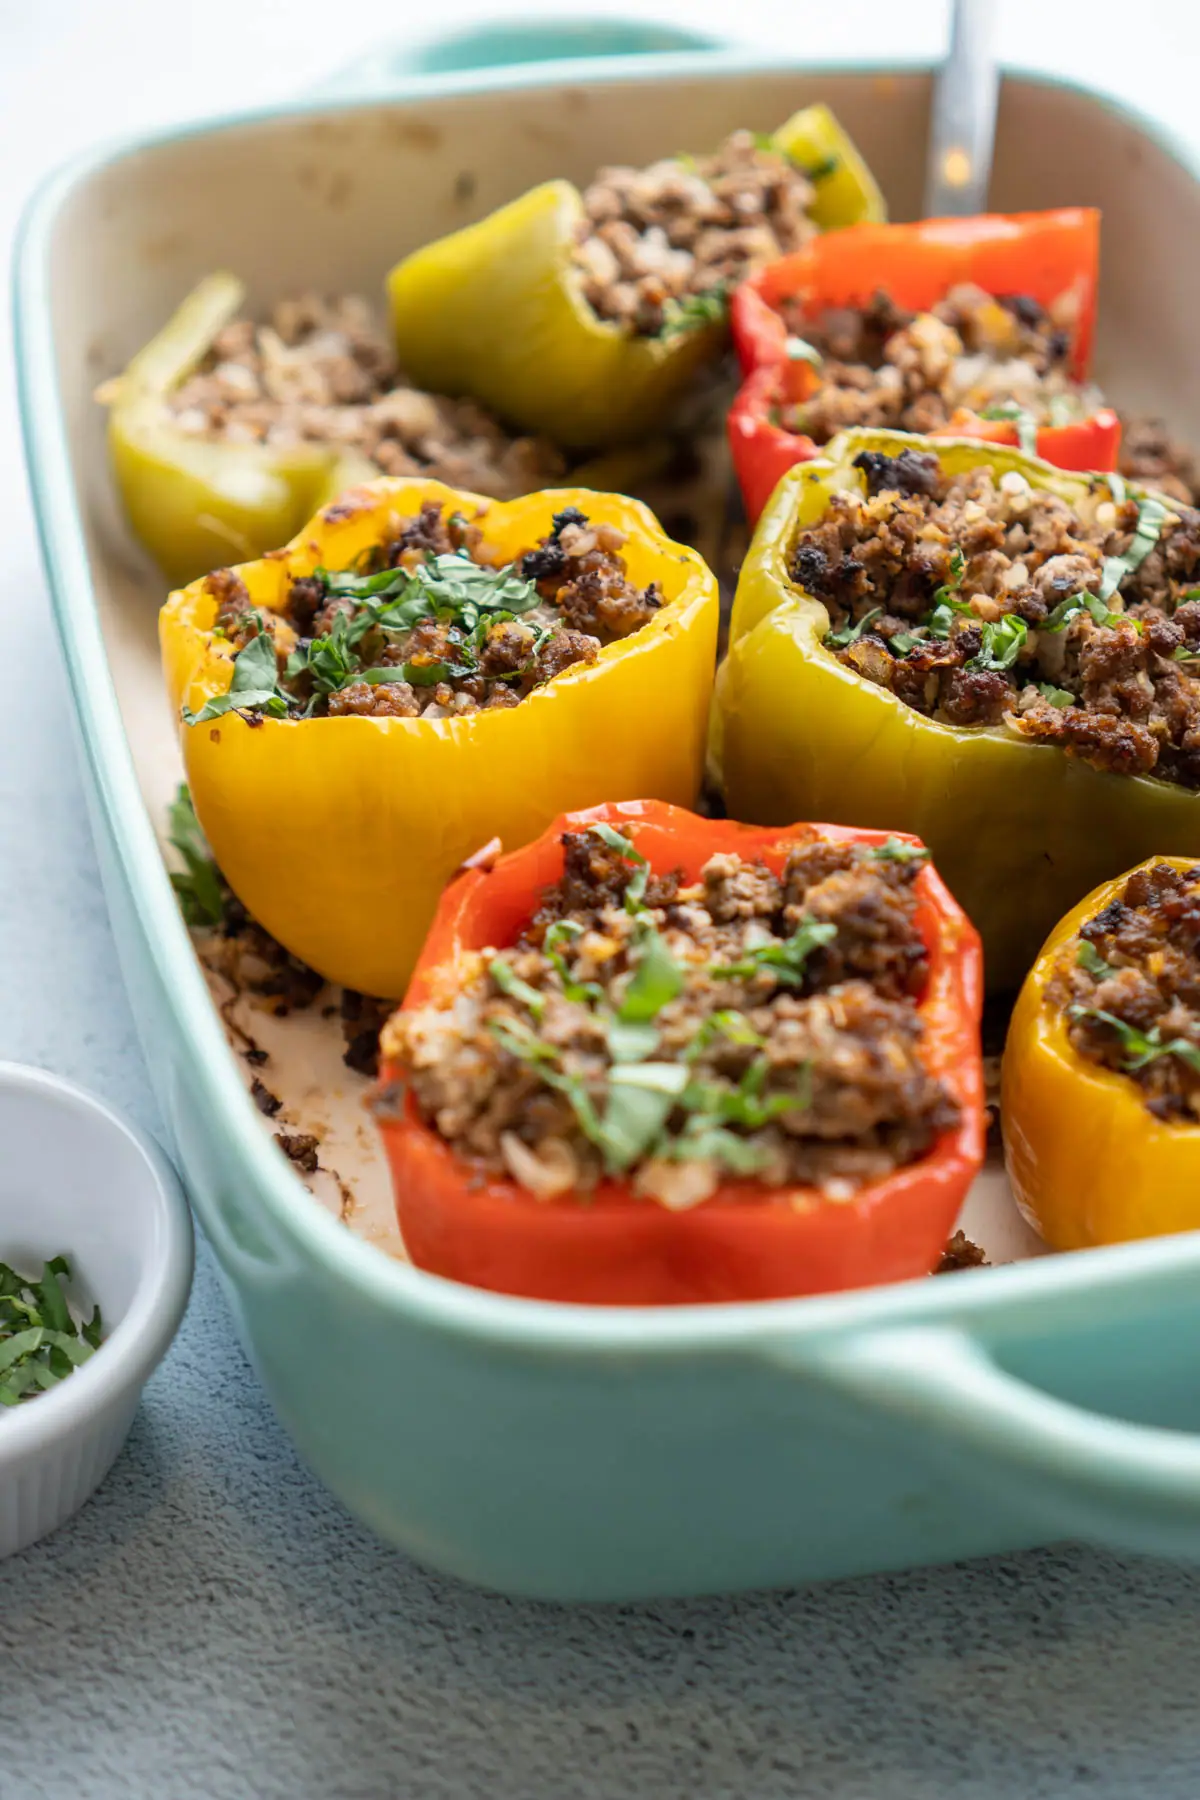 Casserole dish with keto stuffed peppers prepared from the recipe.